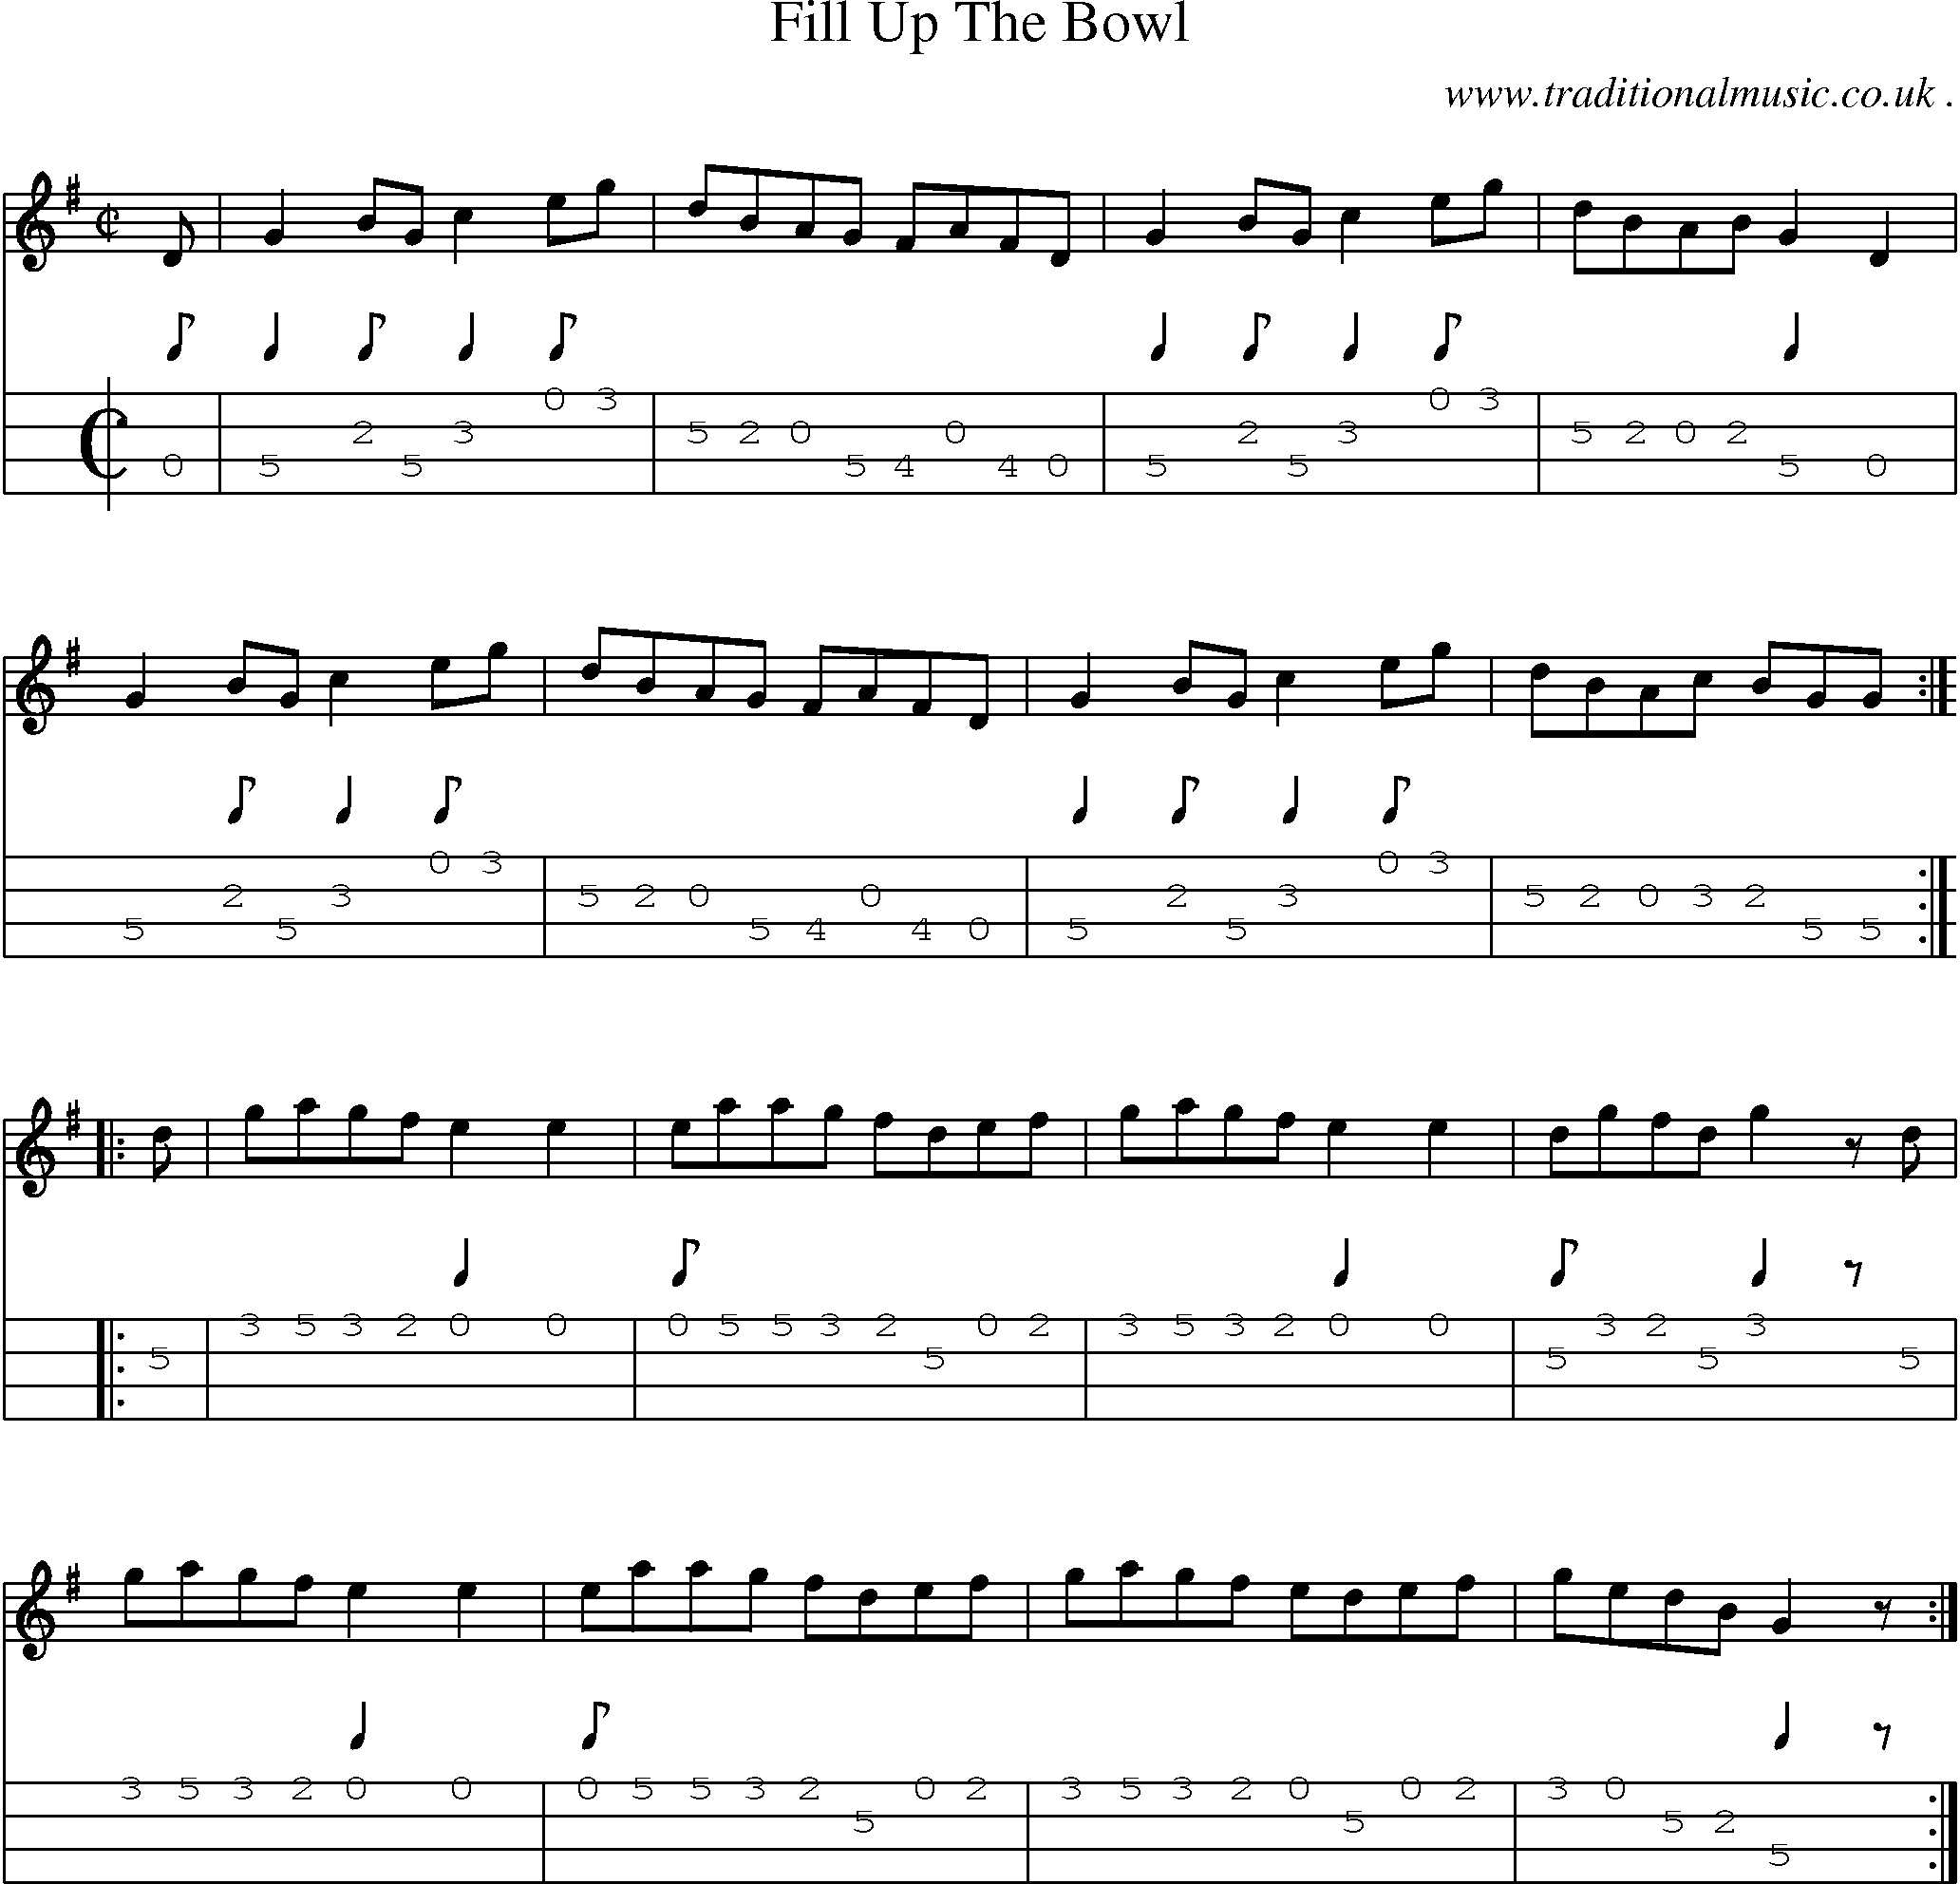 Sheet-Music and Mandolin Tabs for Fill Up The Bowl